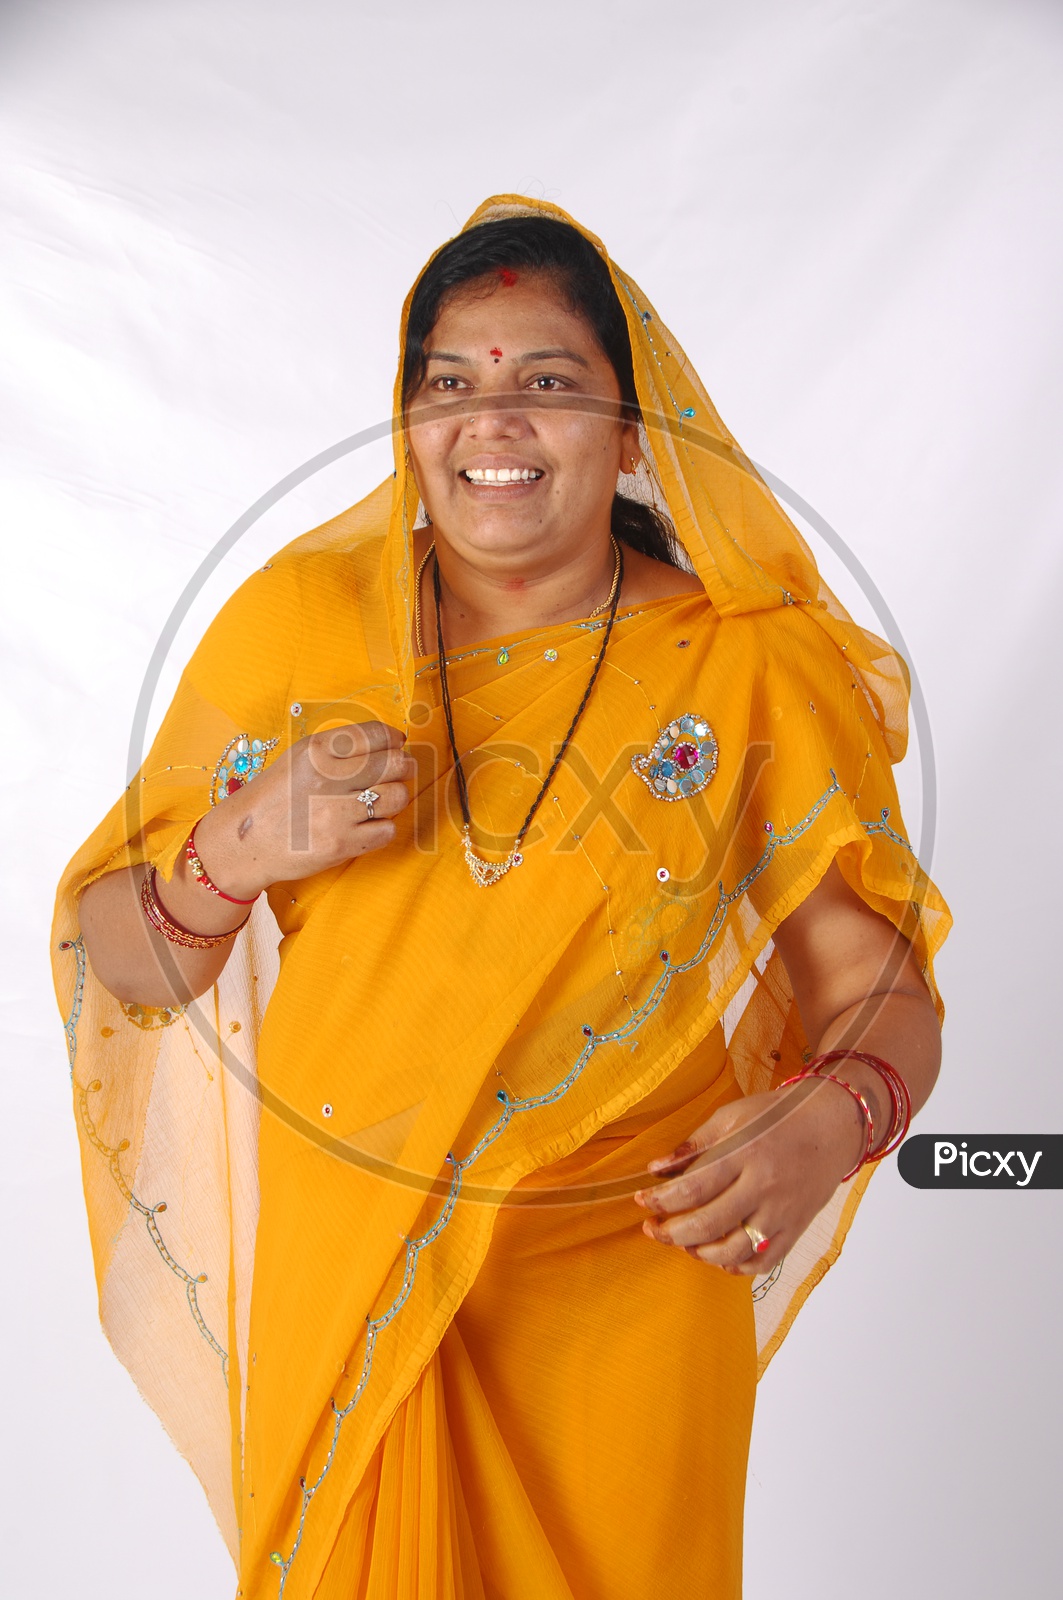 An Indian Woman In Casual Saree or Sari  And Veil Over Her Head  and With A Smile Face on an Isolated White Background